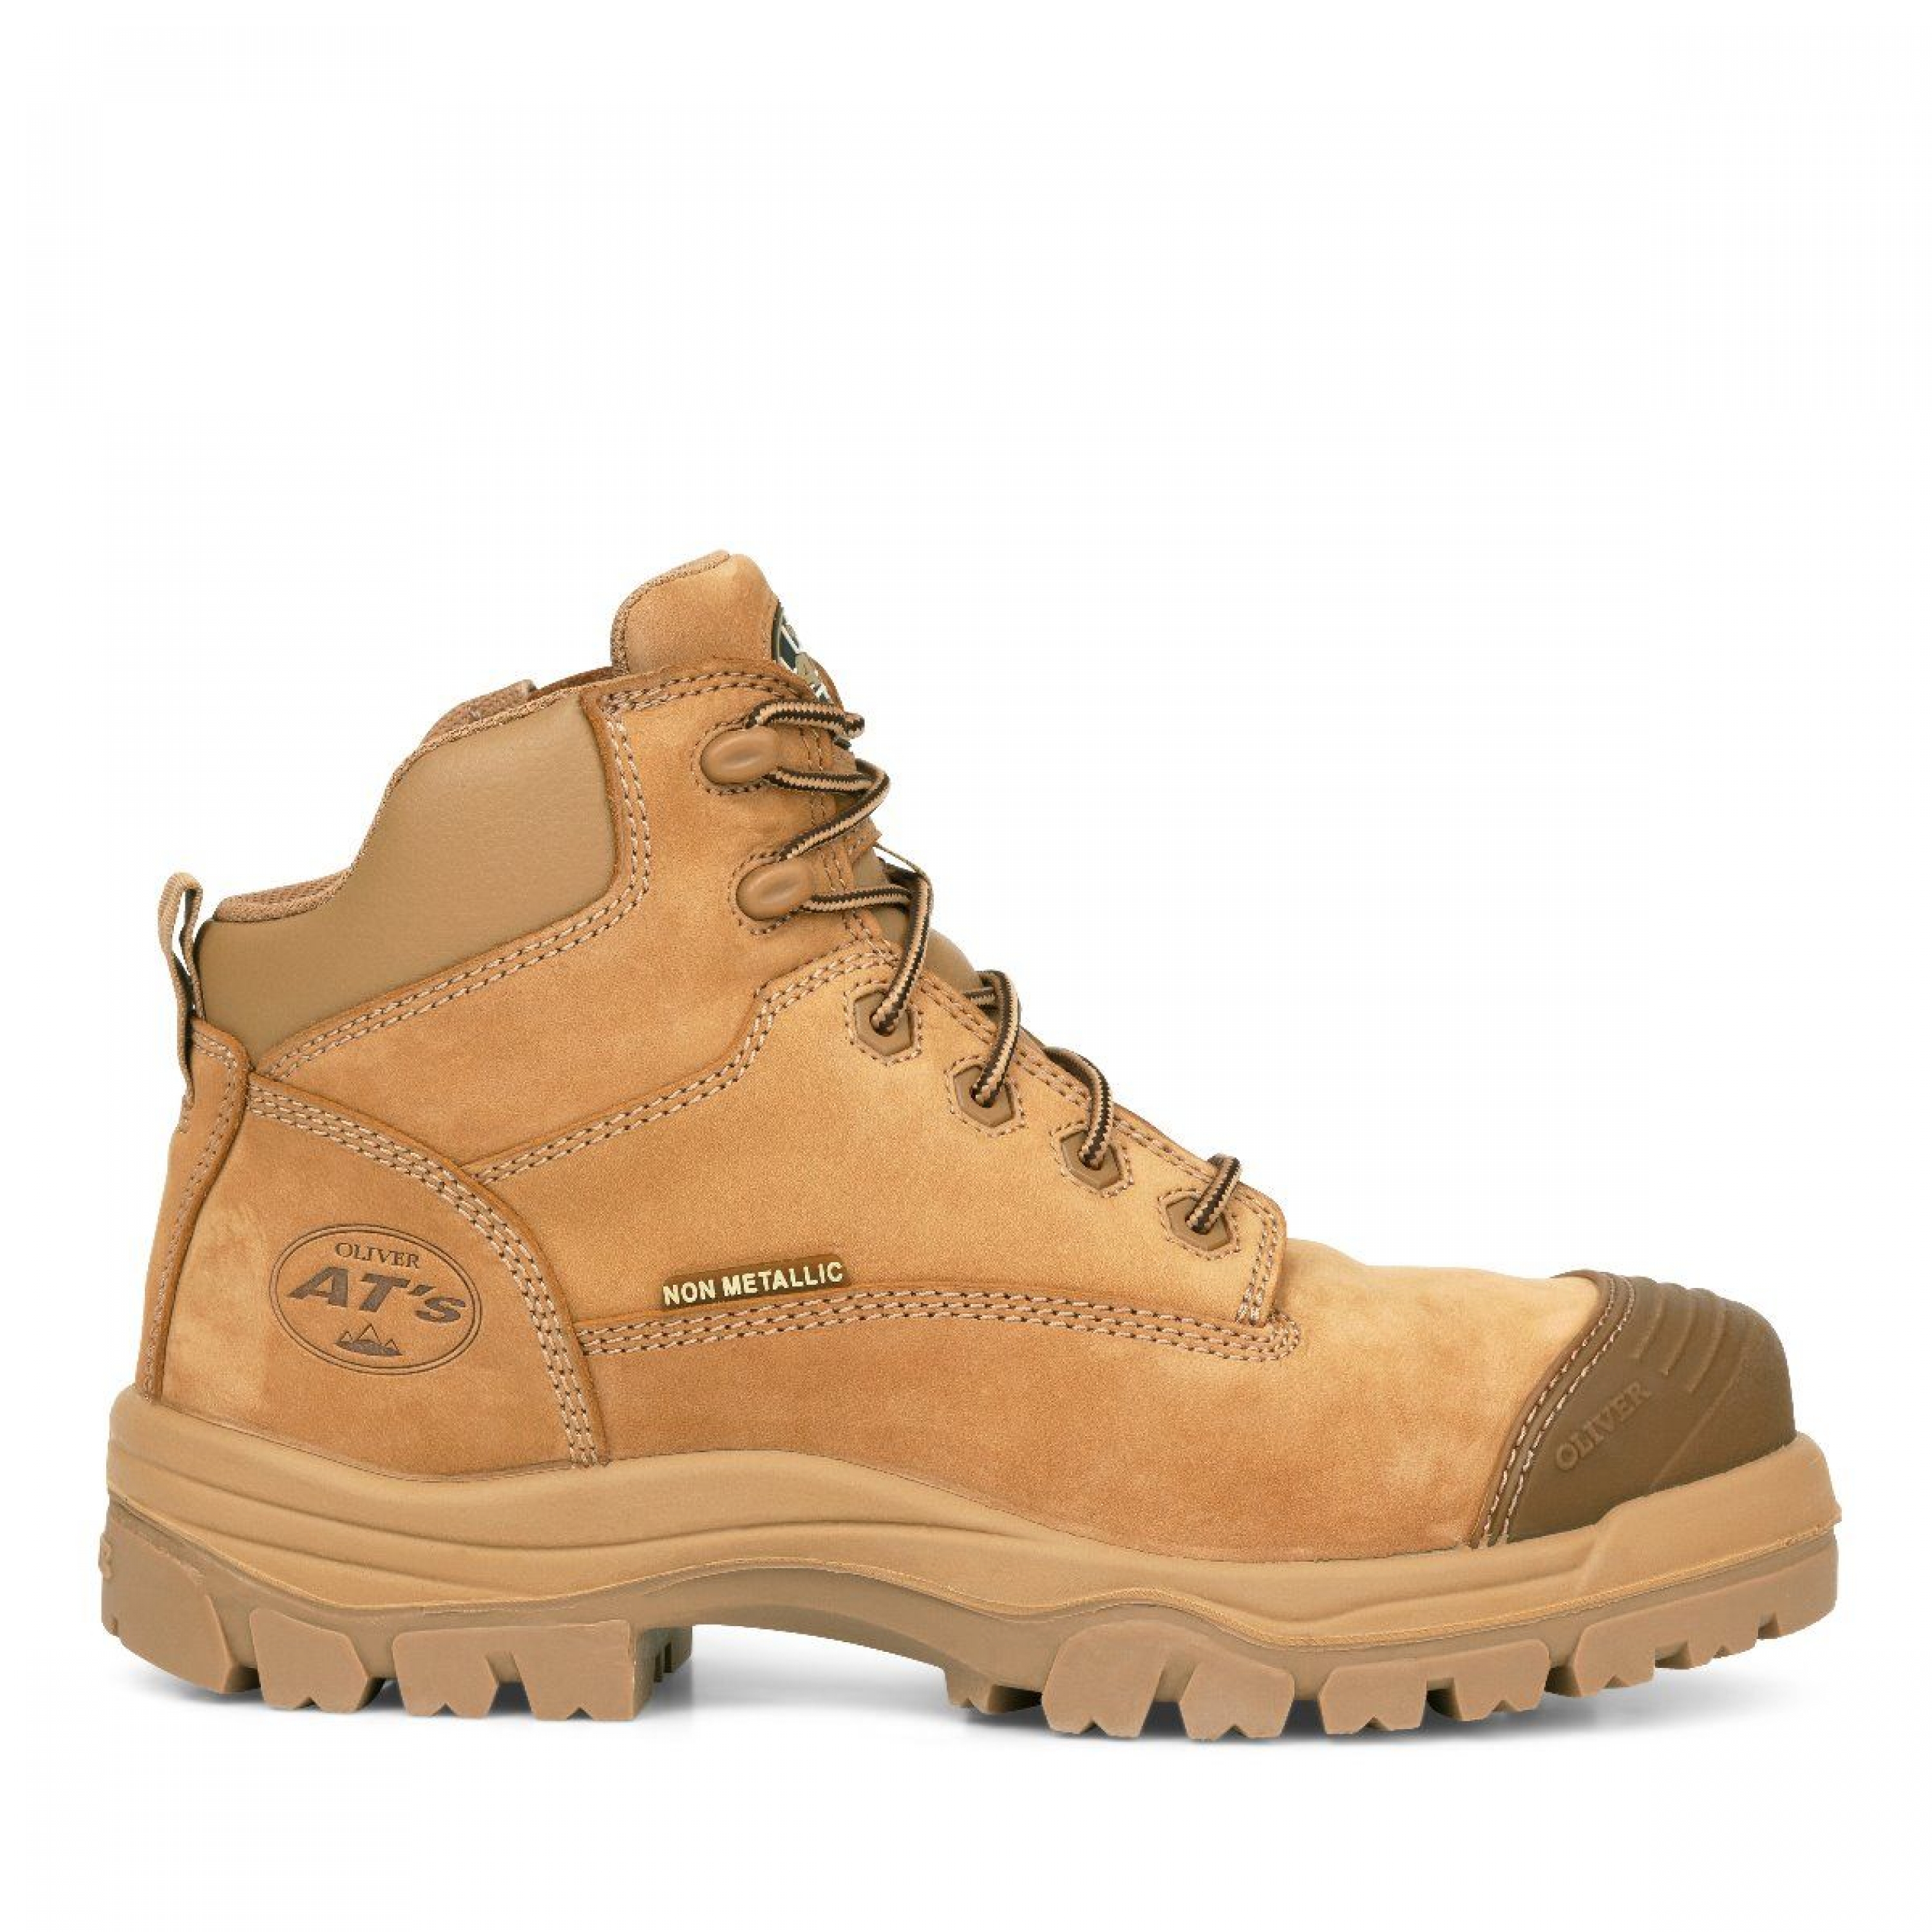 OLIVER HIKER130MM STONE ZIP SIDED NON METALLIC BOOT